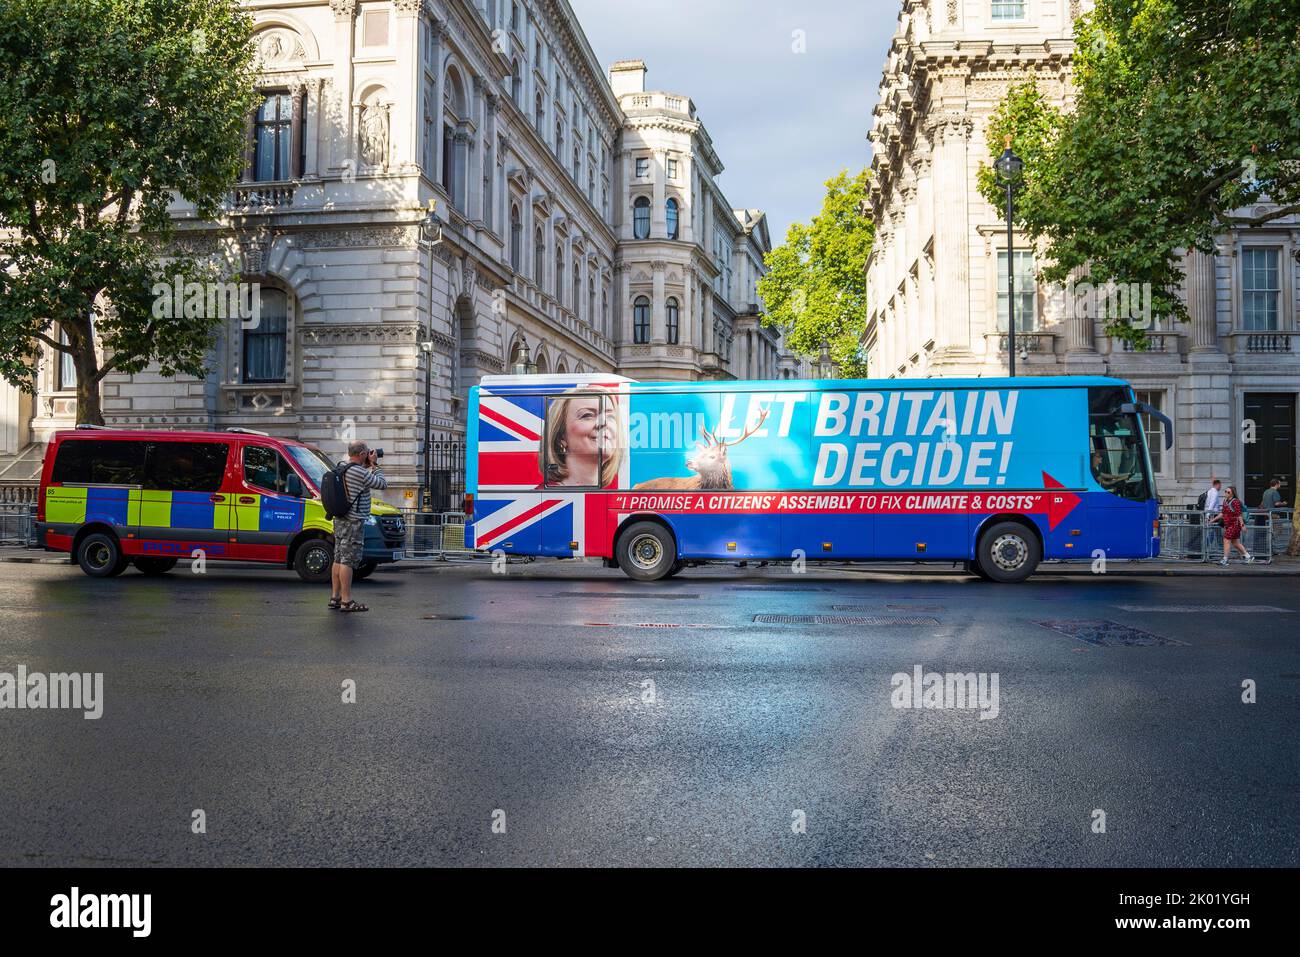 A hoax bus from Extinction Rebellion with the appearance of a Liz Truss campaign bus, outside Downing Street. Citizen's assembly slogan. Police van Stock Photo